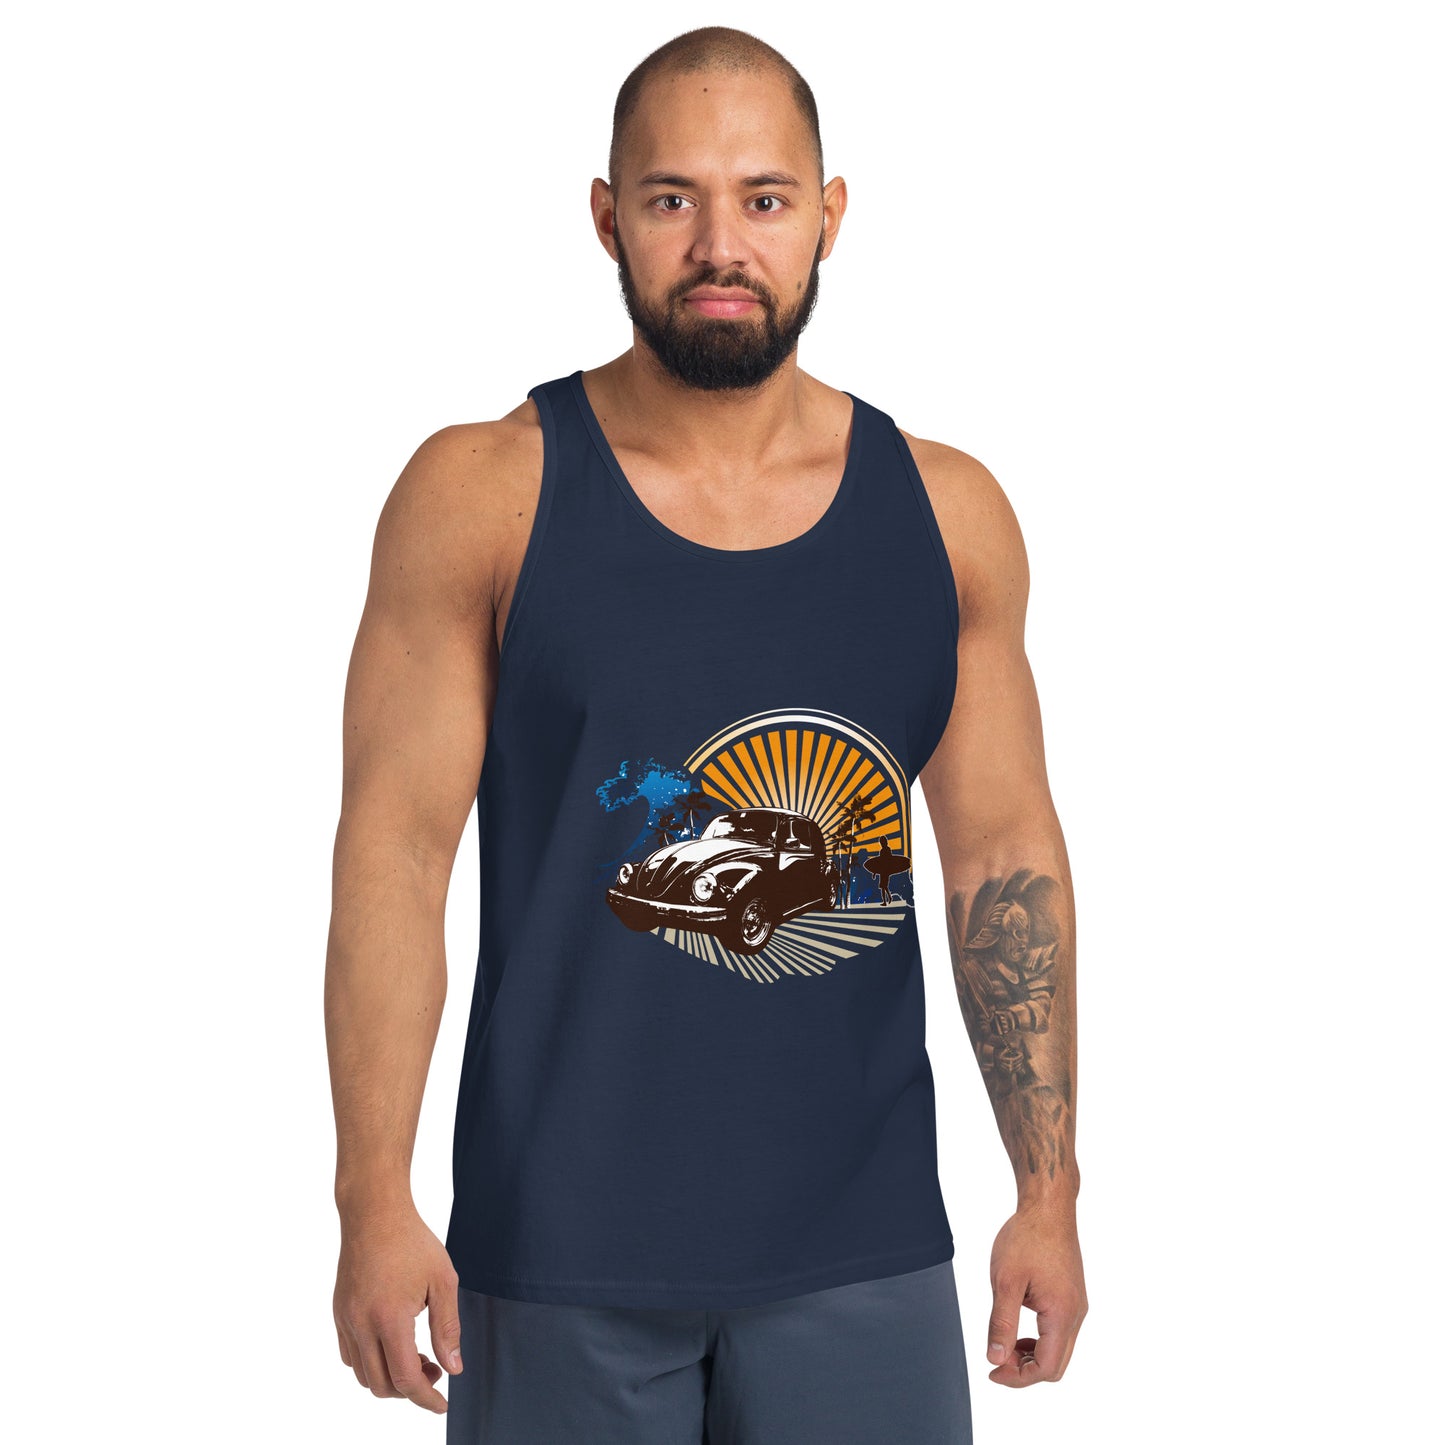 Men with navy blue tank top with sunset and beetle car